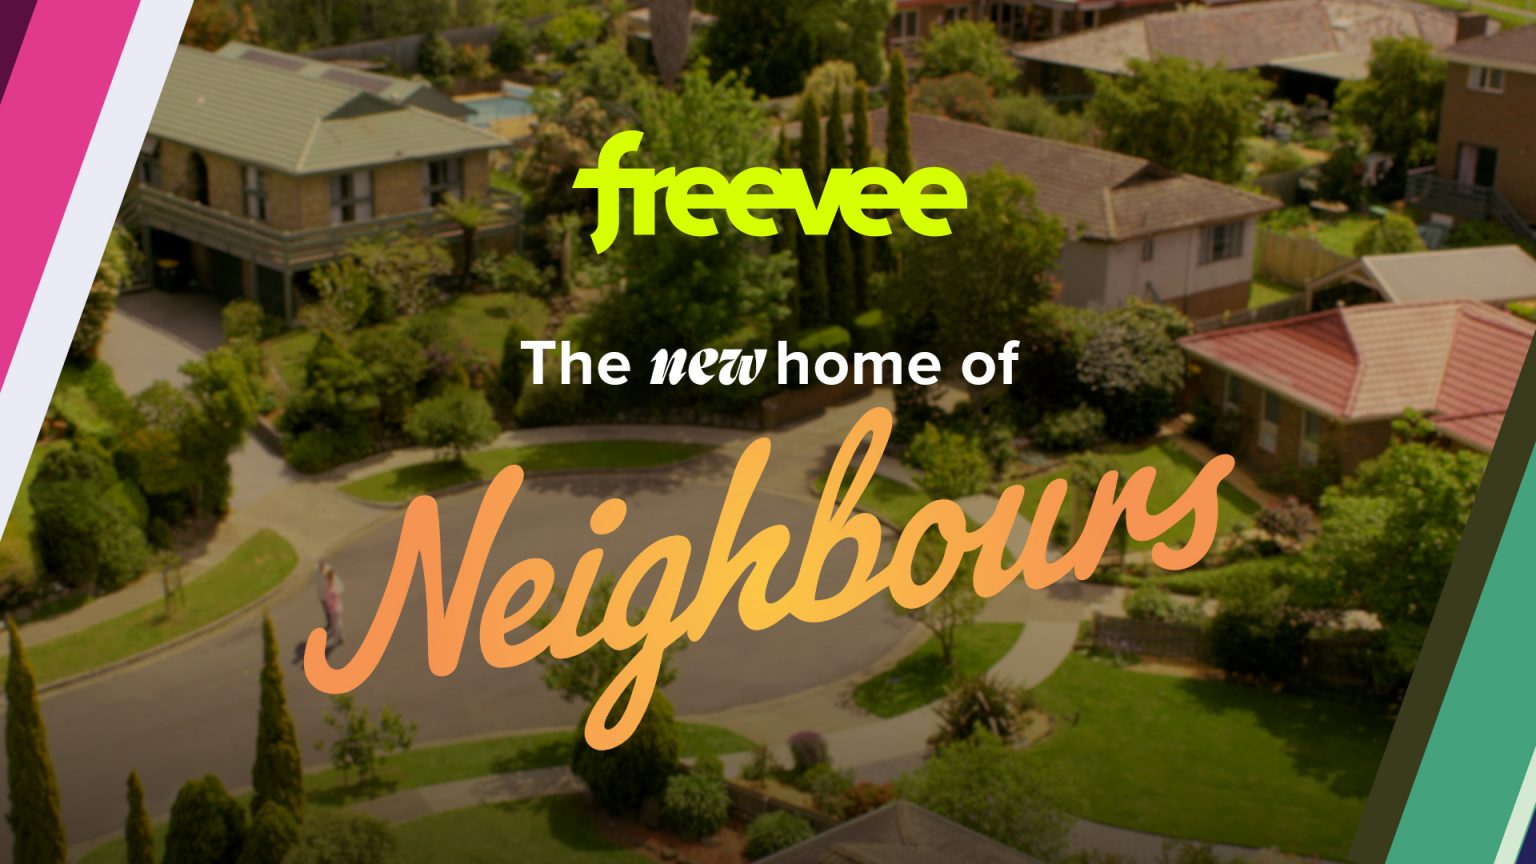 Amazon Freevee reveals more Neighours returning cast members Advanced